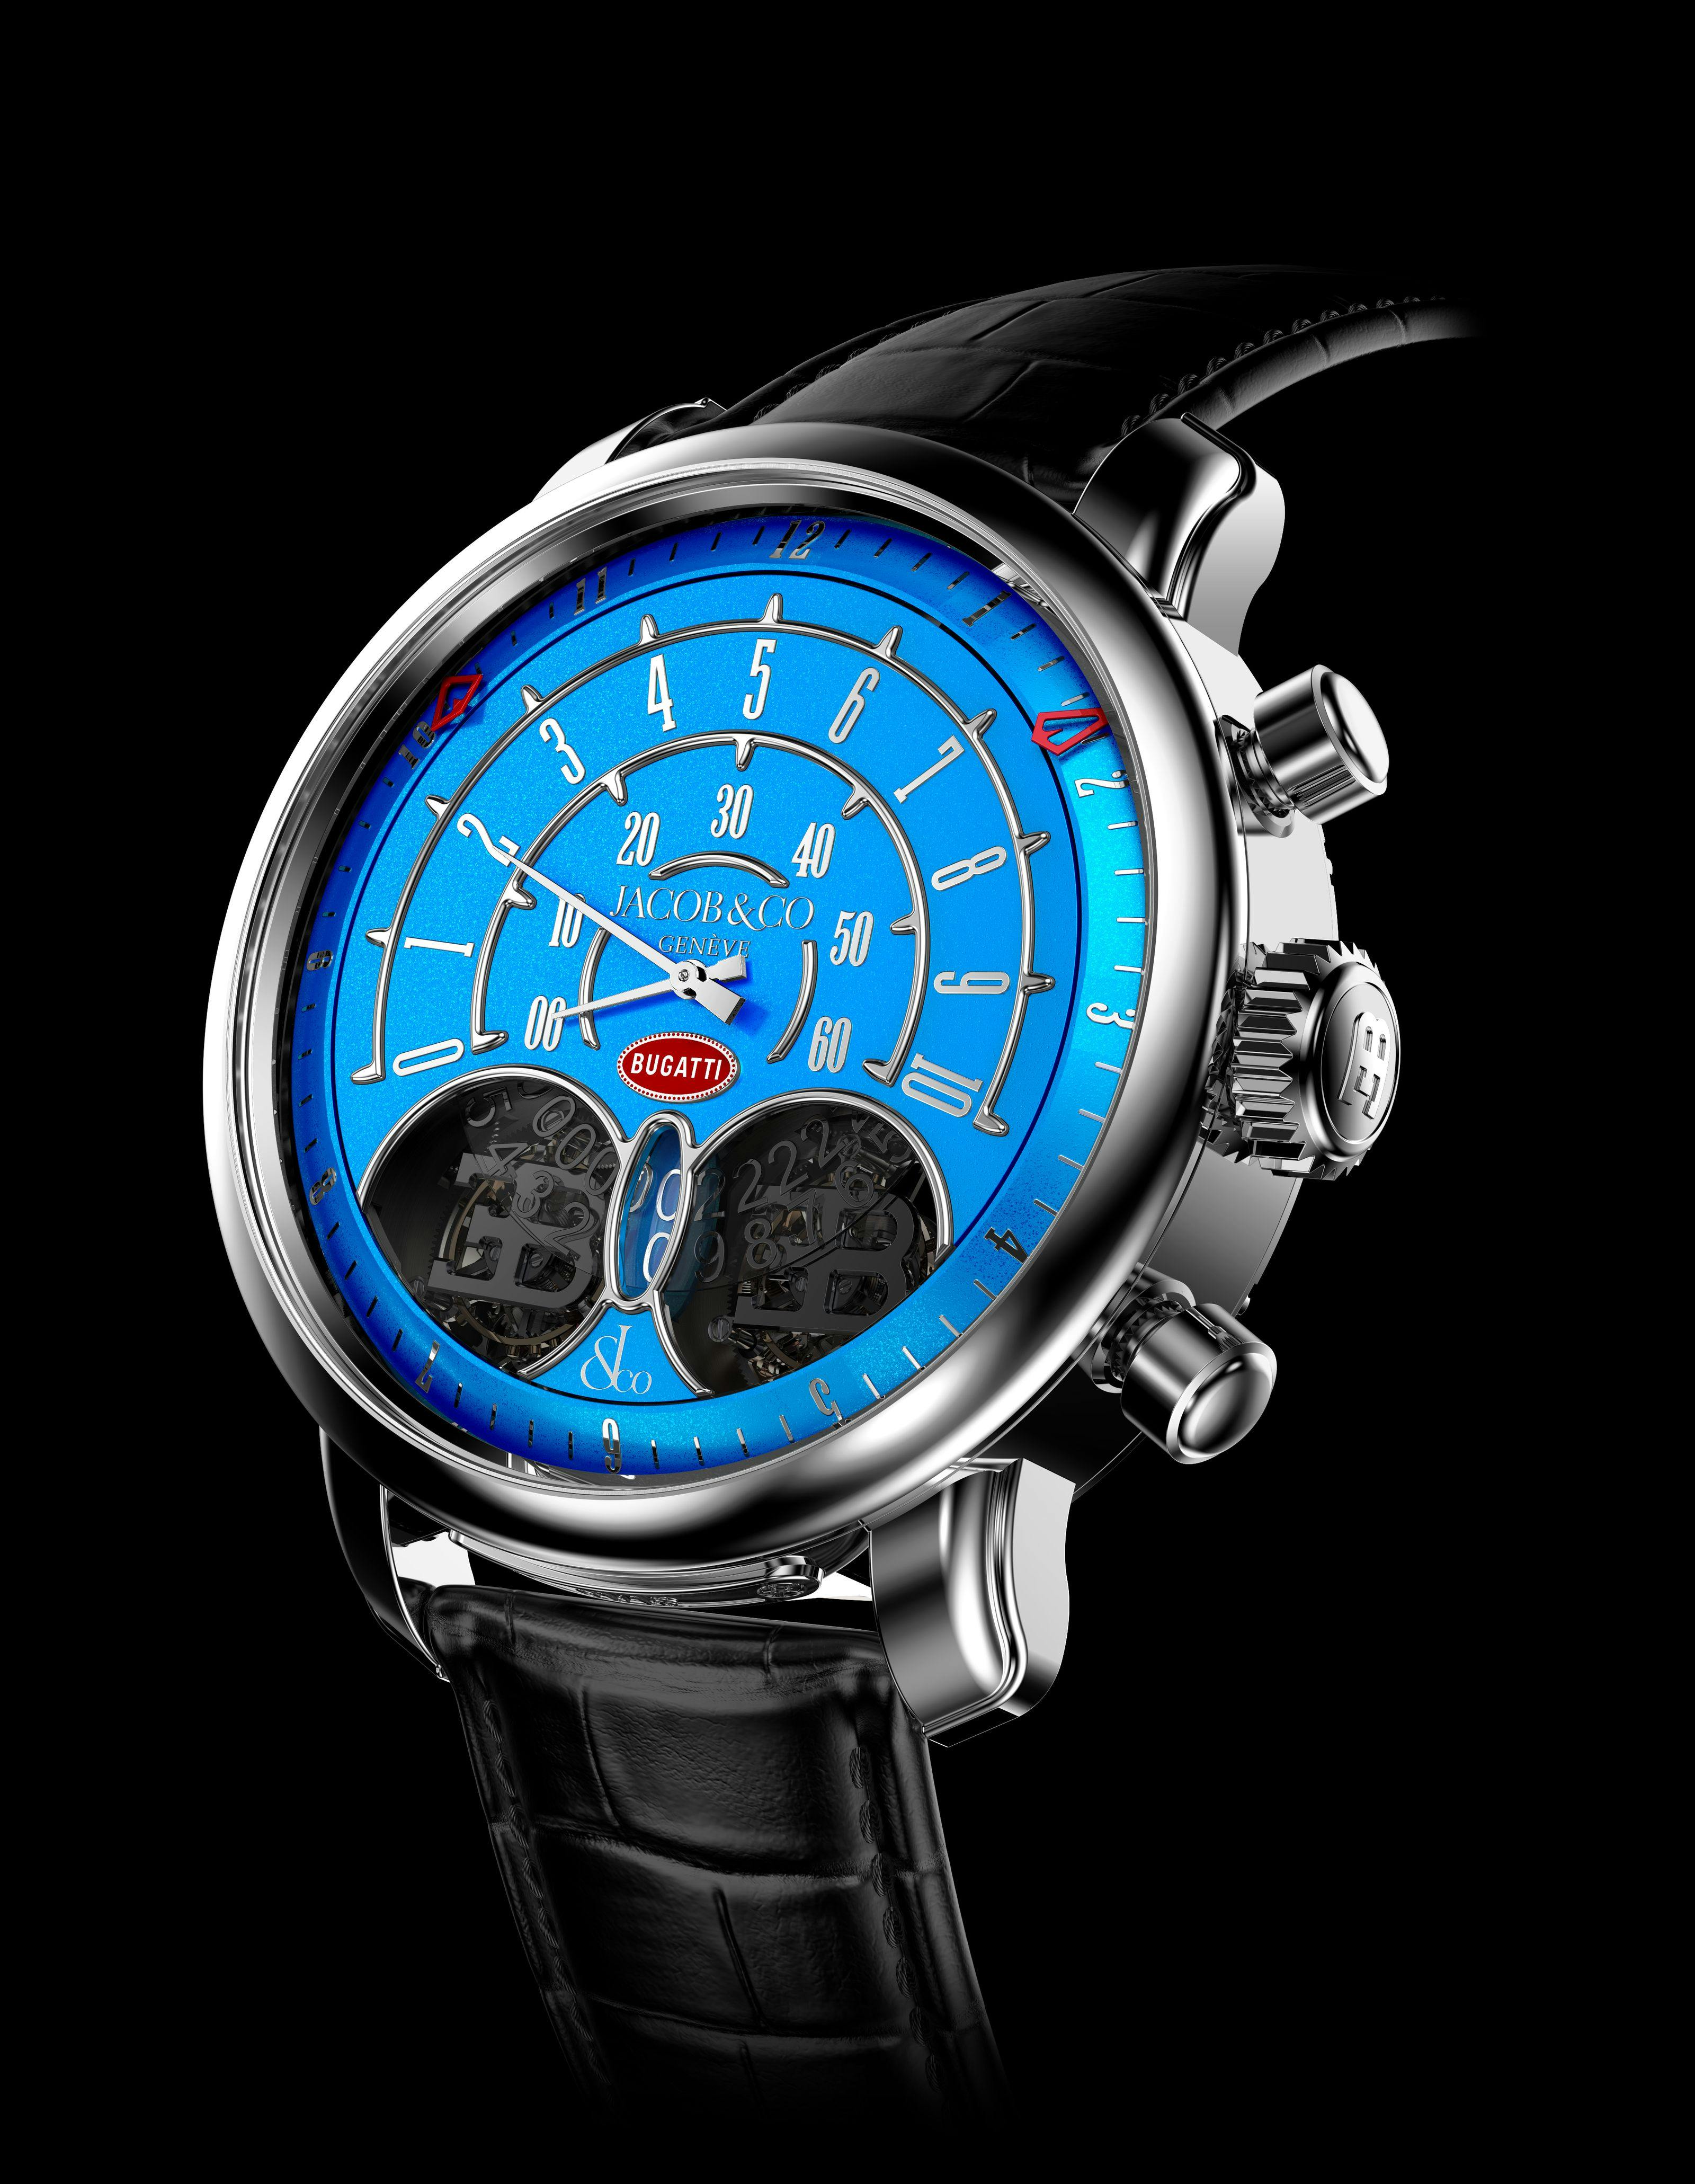 Encapsulating History and Innovation: The Jean Bugatti Timepiece